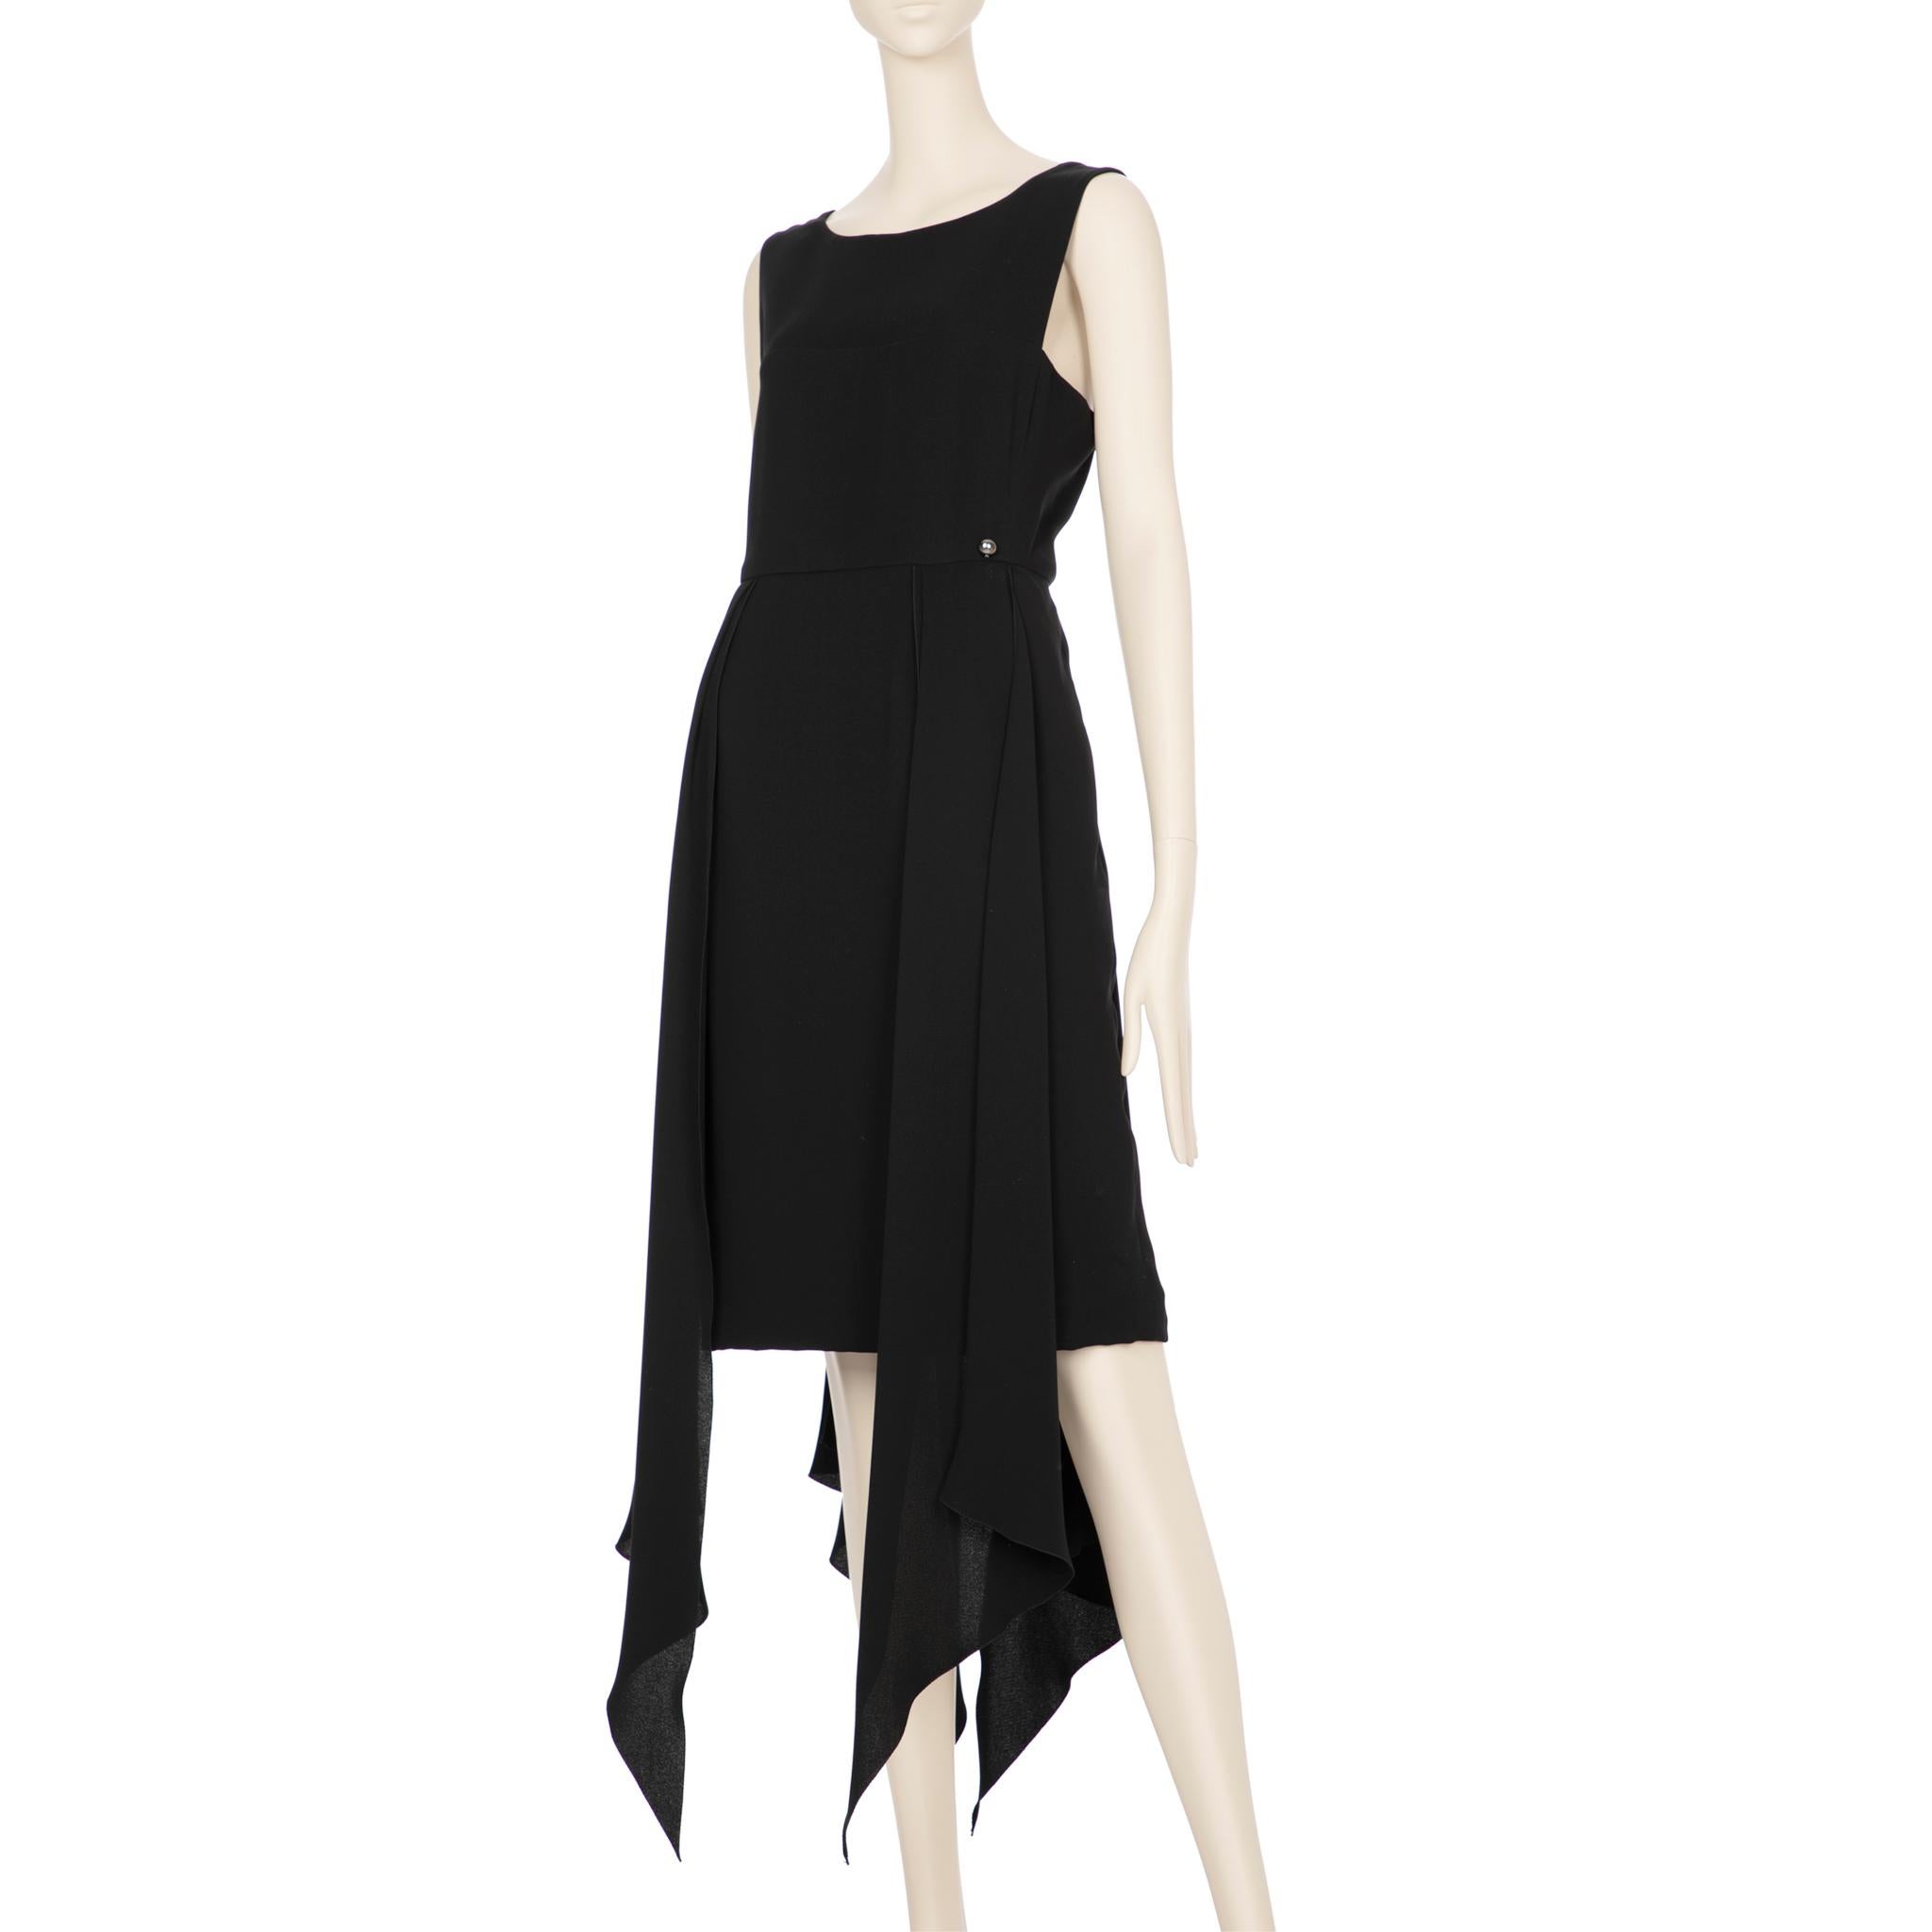 Chanel Black Slip Dress 40 FR In Excellent Condition For Sale In DOUBLE BAY, NSW